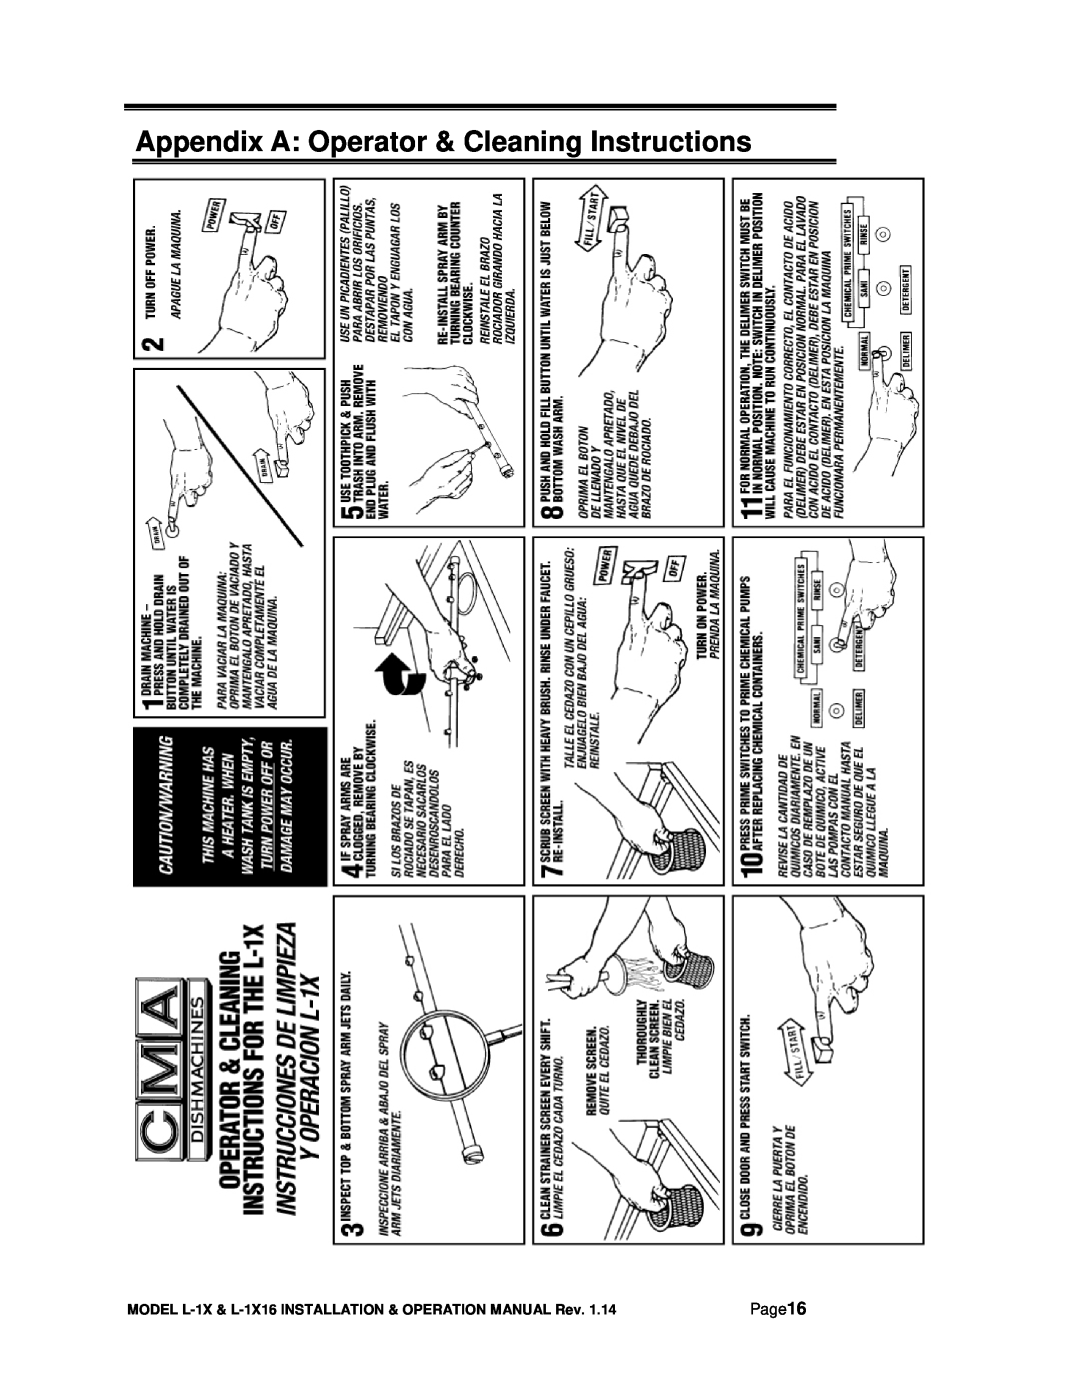 CMA Dishmachines L-1X16 manual Appendix A Operator & Cleaning Instructions, Page16 